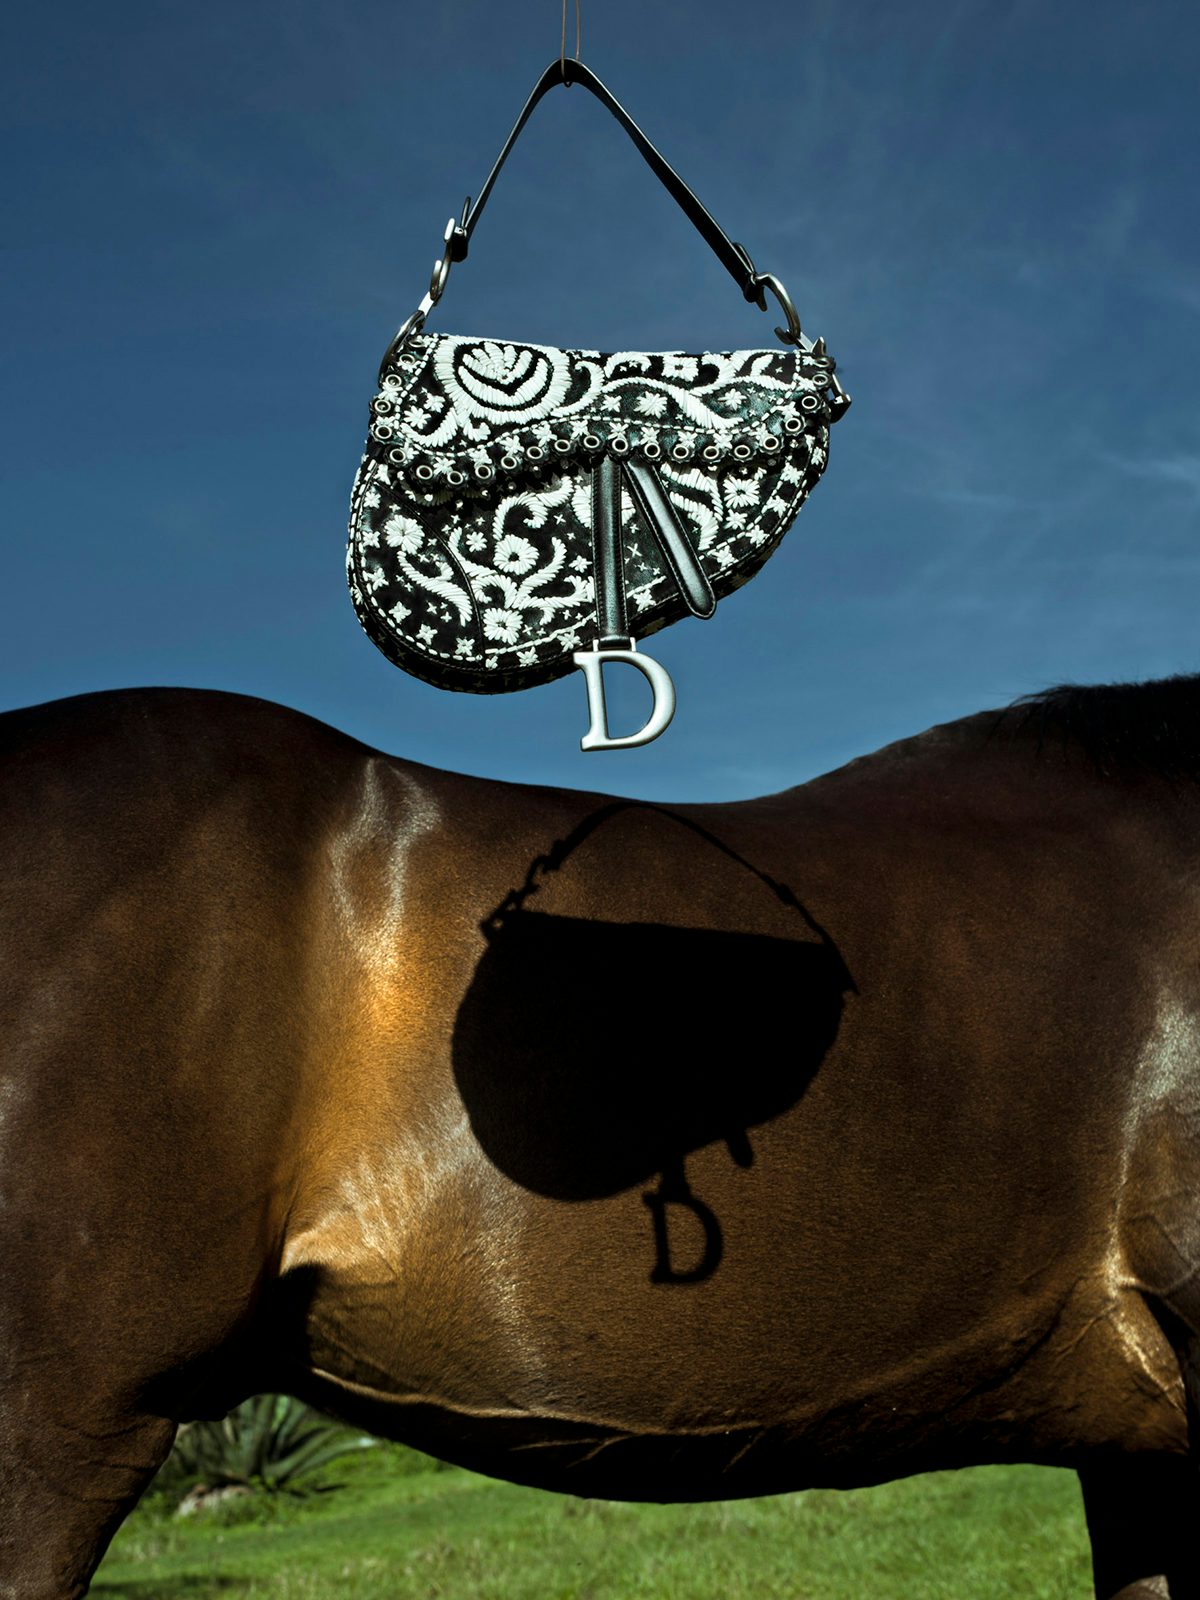 Photograph of a horse's body with the shadow of a handbag cast onto it, by Magnum photographer Cristina de Middel